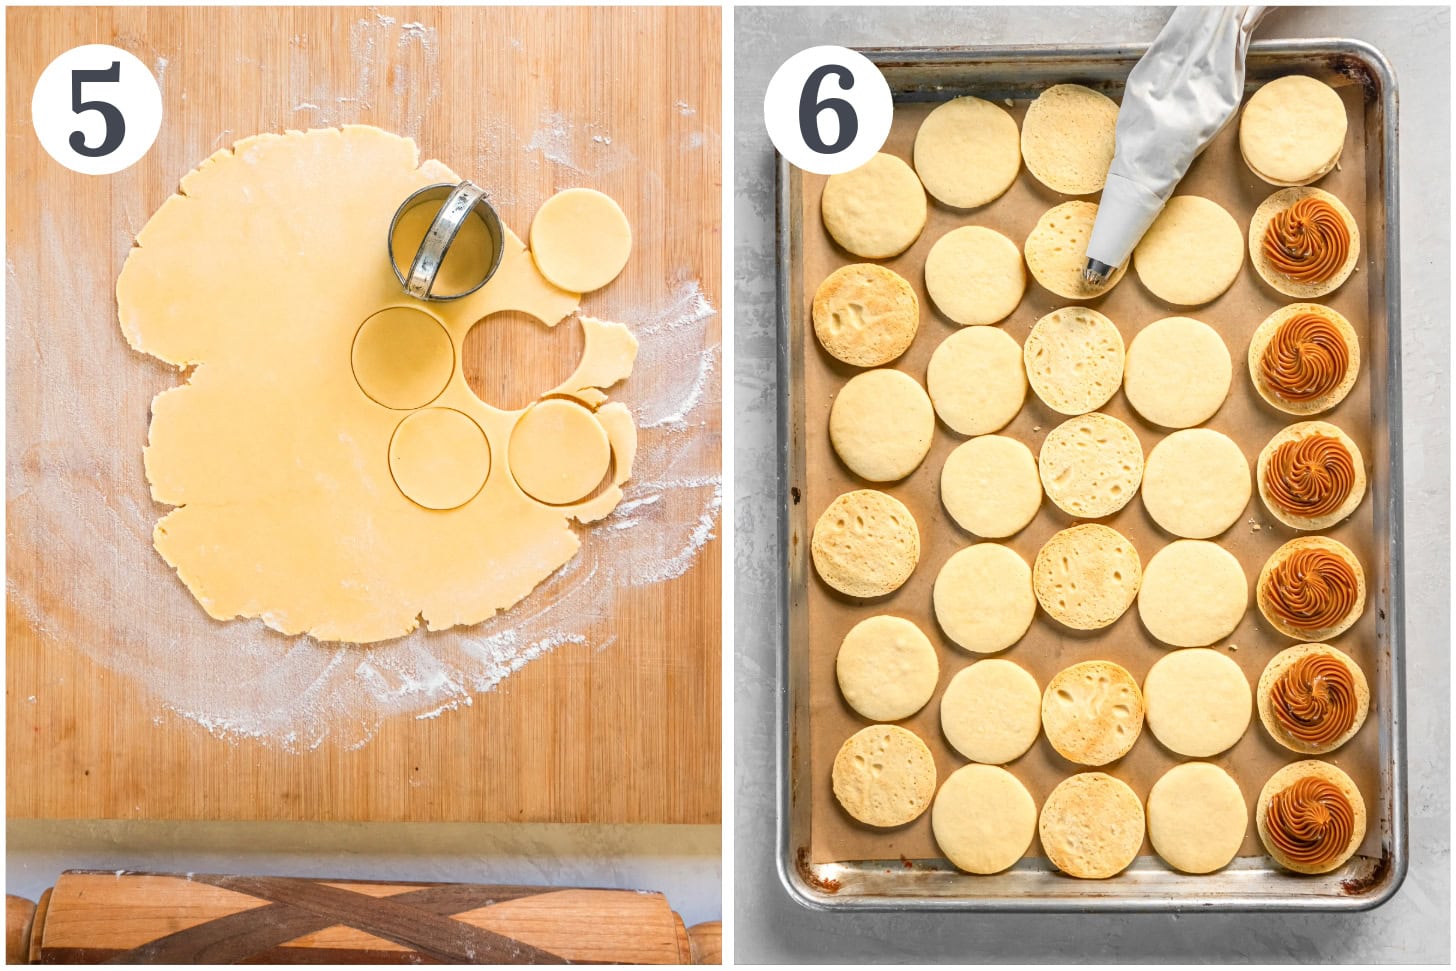 photo collage demonstrating how to cut out cookie dough and fill baked cookies with dulce de leche.